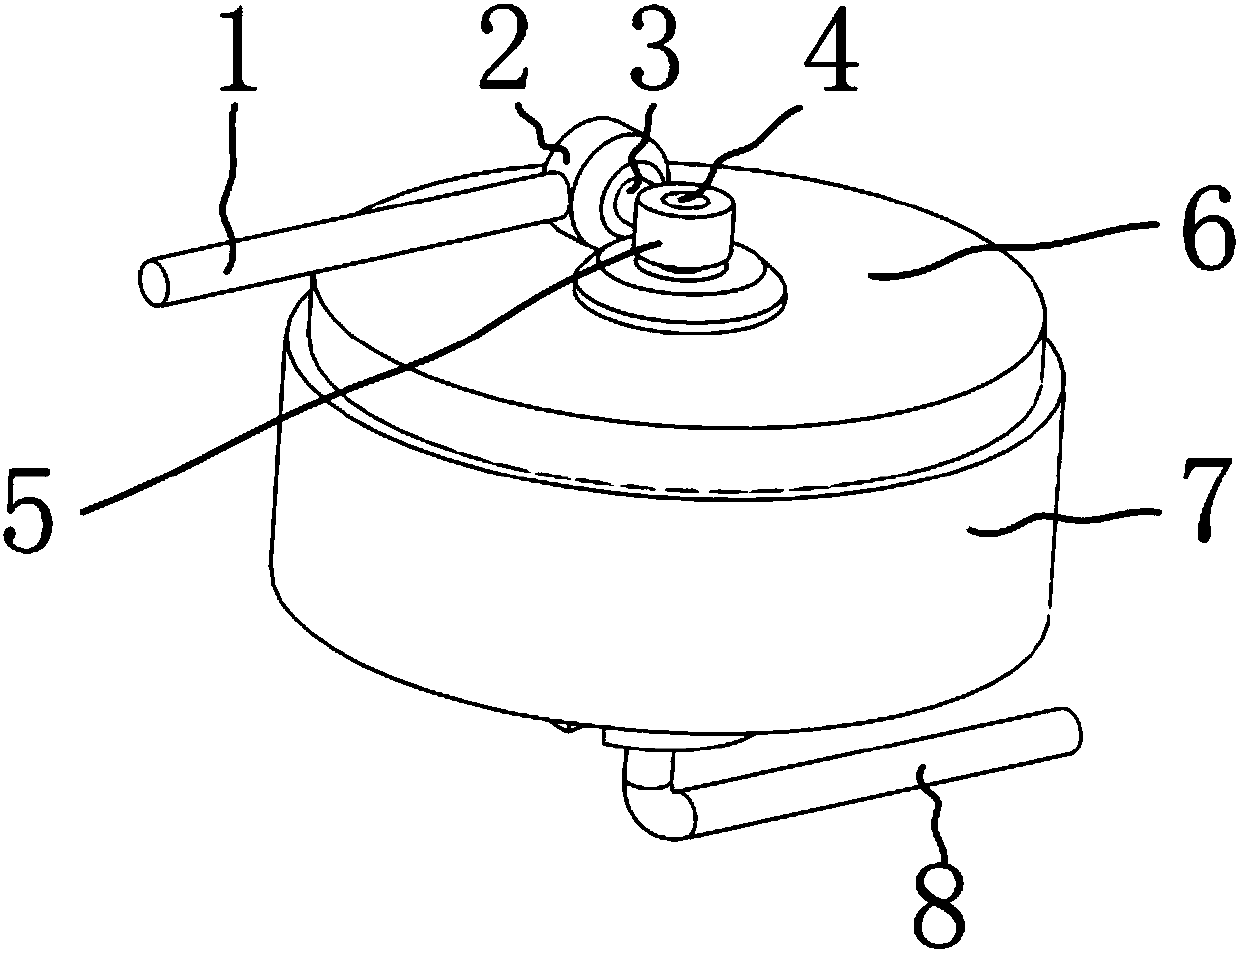 Detachable hook mechanism for carriage connection